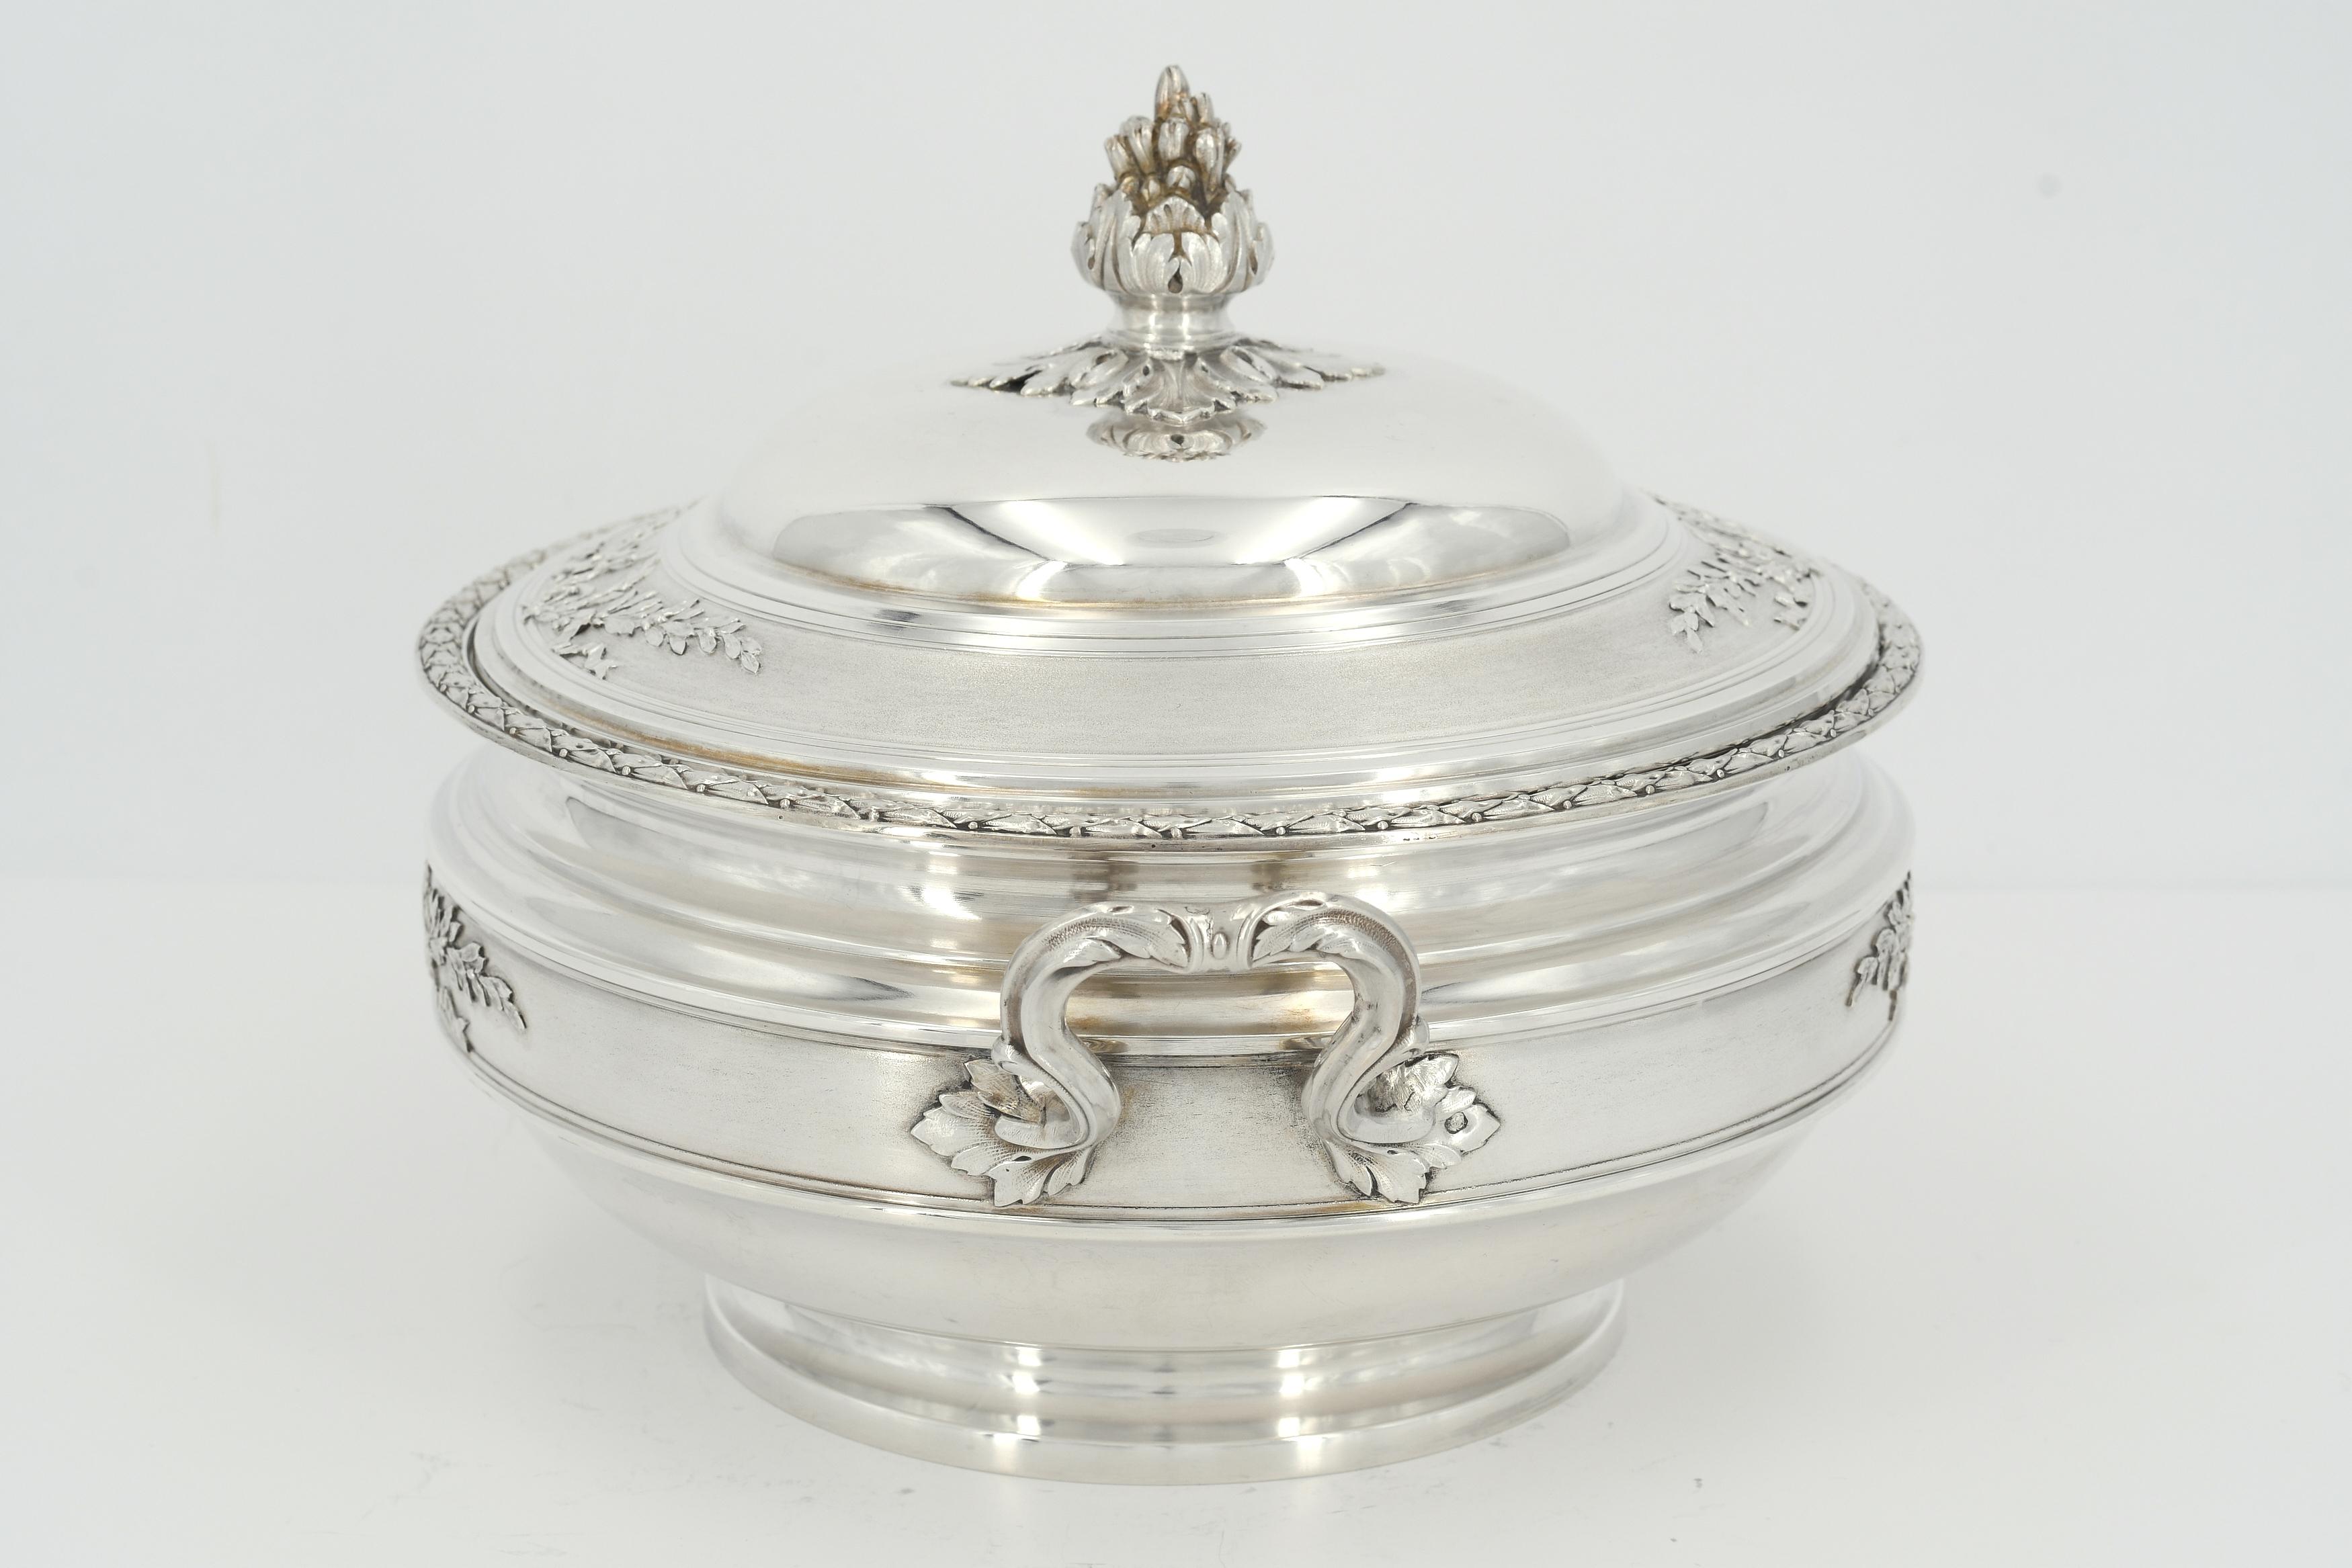 Silver vegetable bowl with laurel wreaths and floral knob - Image 3 of 8